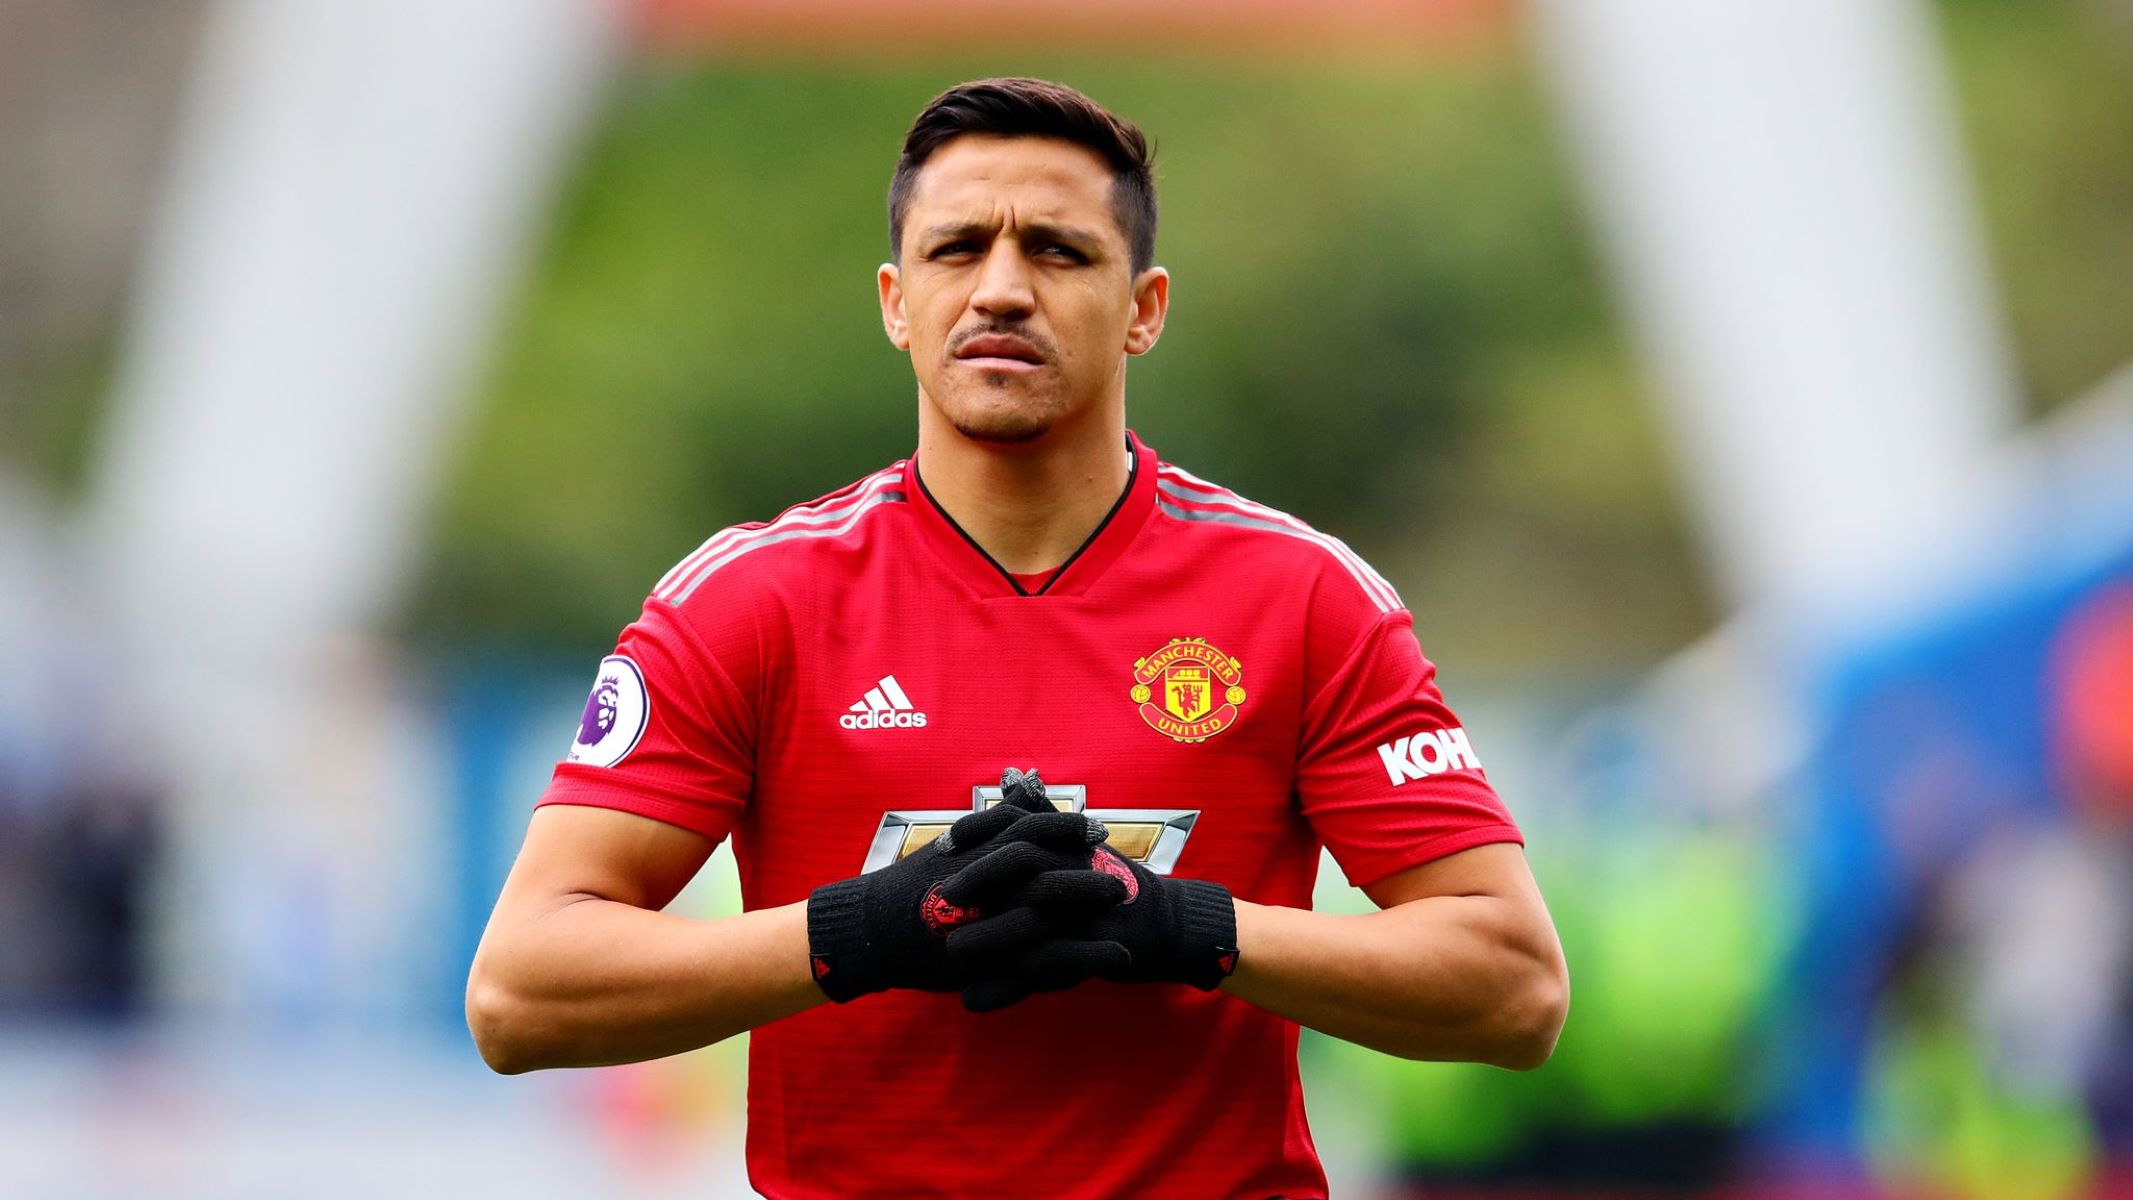 22 Mind-blowing Facts About Alexis Sánchez - Facts.net